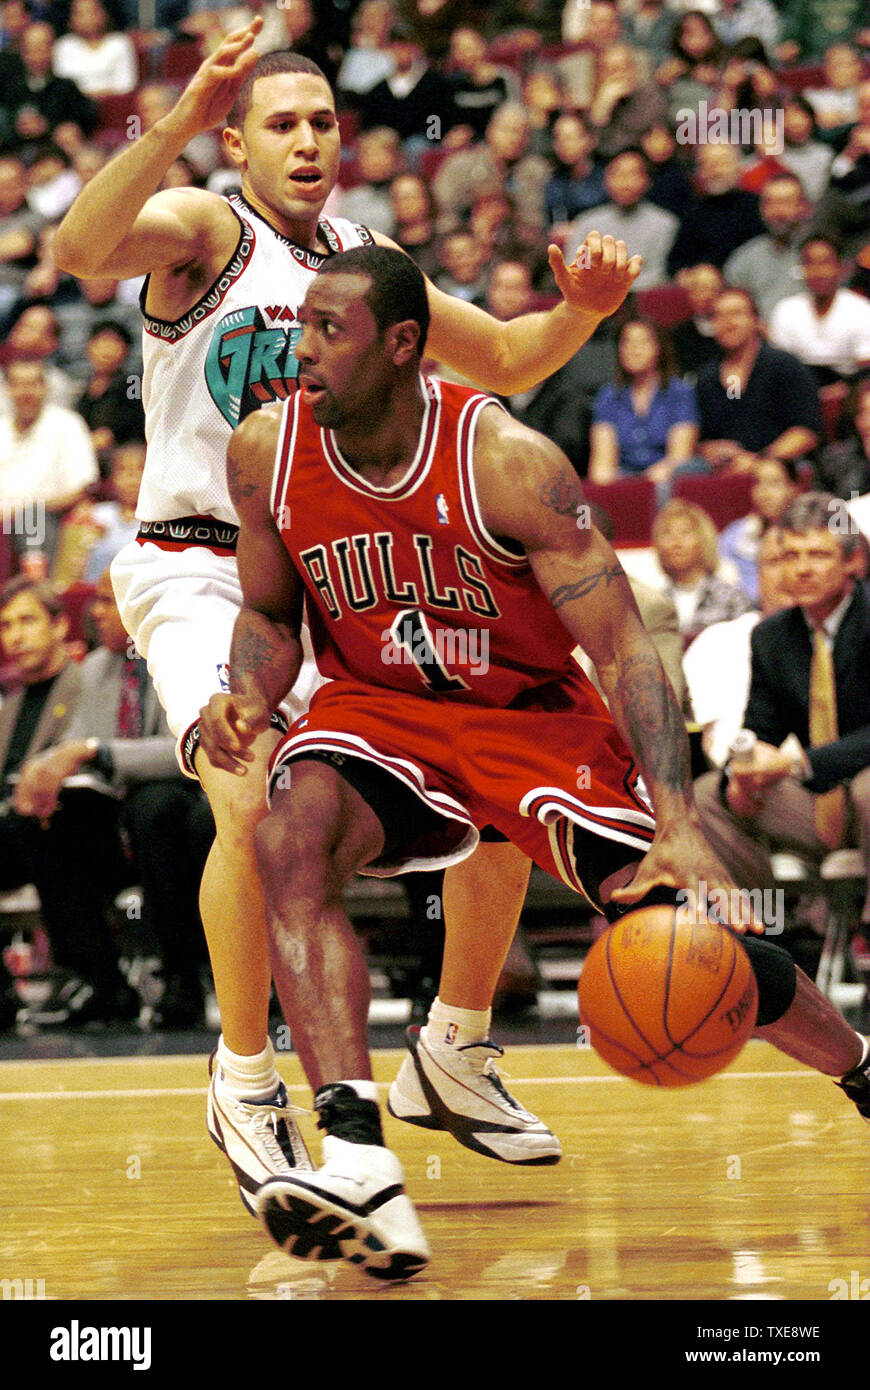 Van 04 February 00 Vancouver Canada Visiting Chicago Bull S Randy Brown Takes The Ball Around Vancouver Grizzlie S Michael Bibby During The First Half At Vancouver S Gm Place February 04